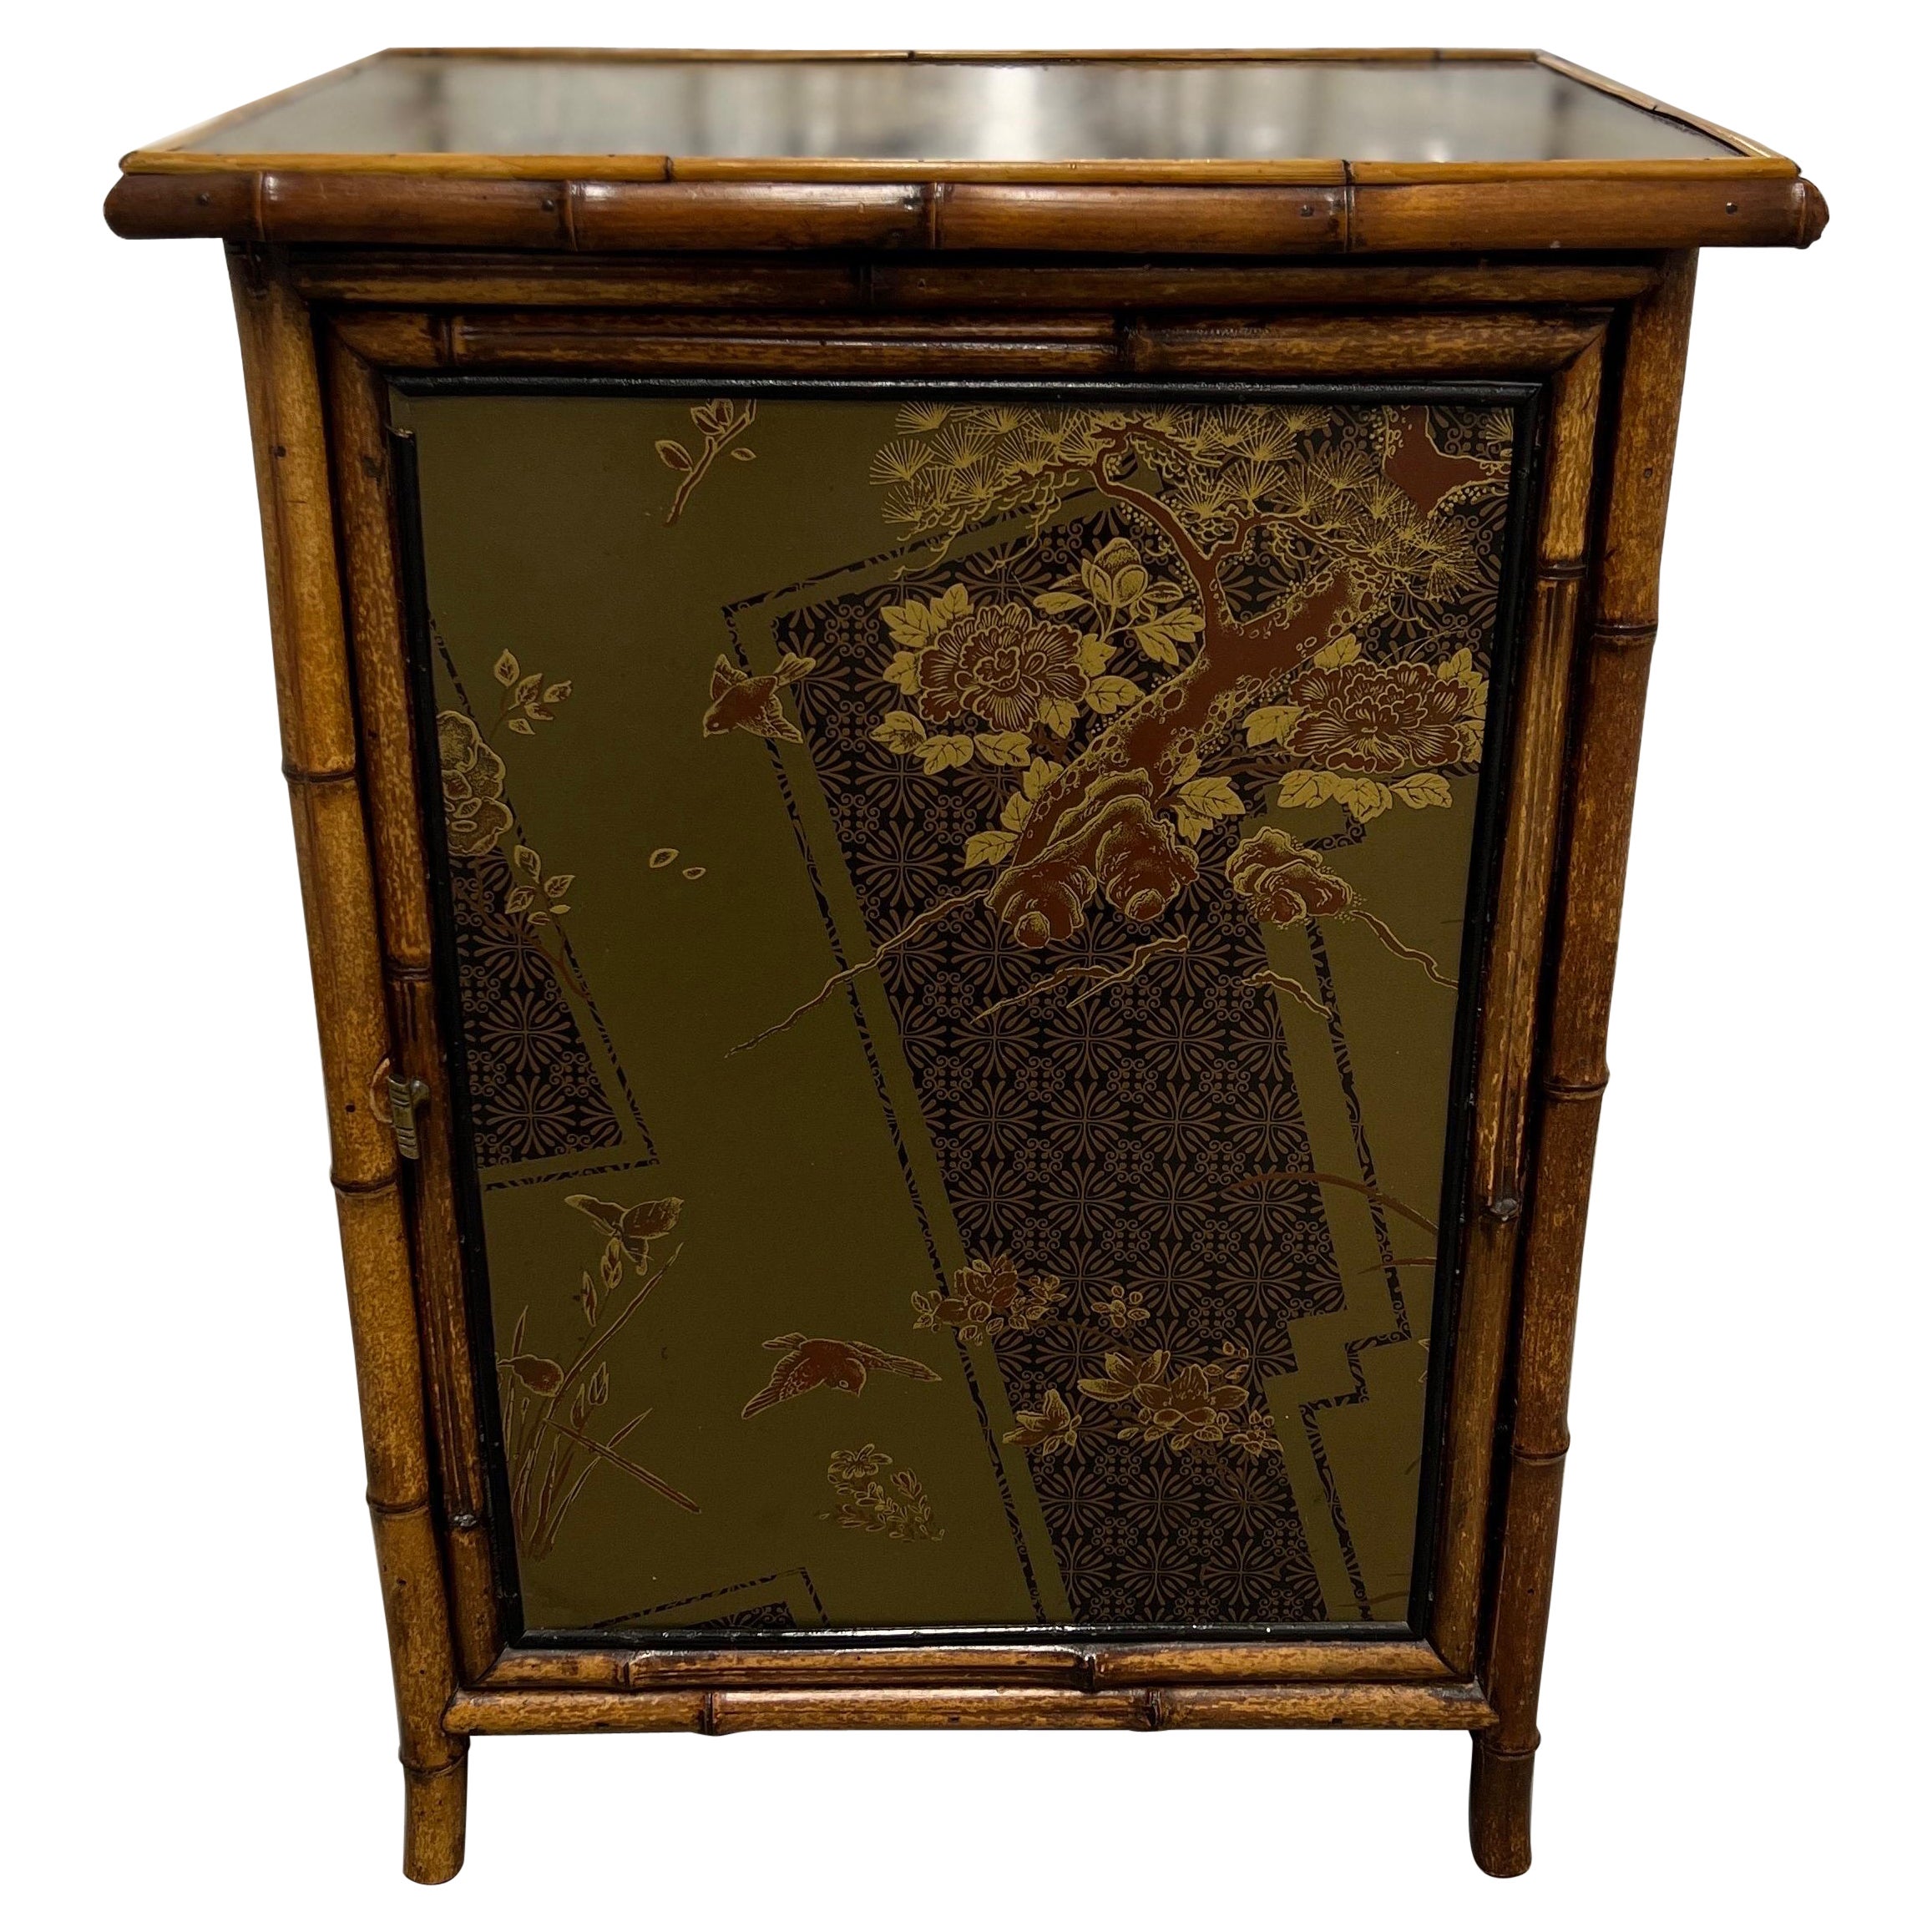 19th Century English Aesthetic Movement Japanned Bamboo Cabinet